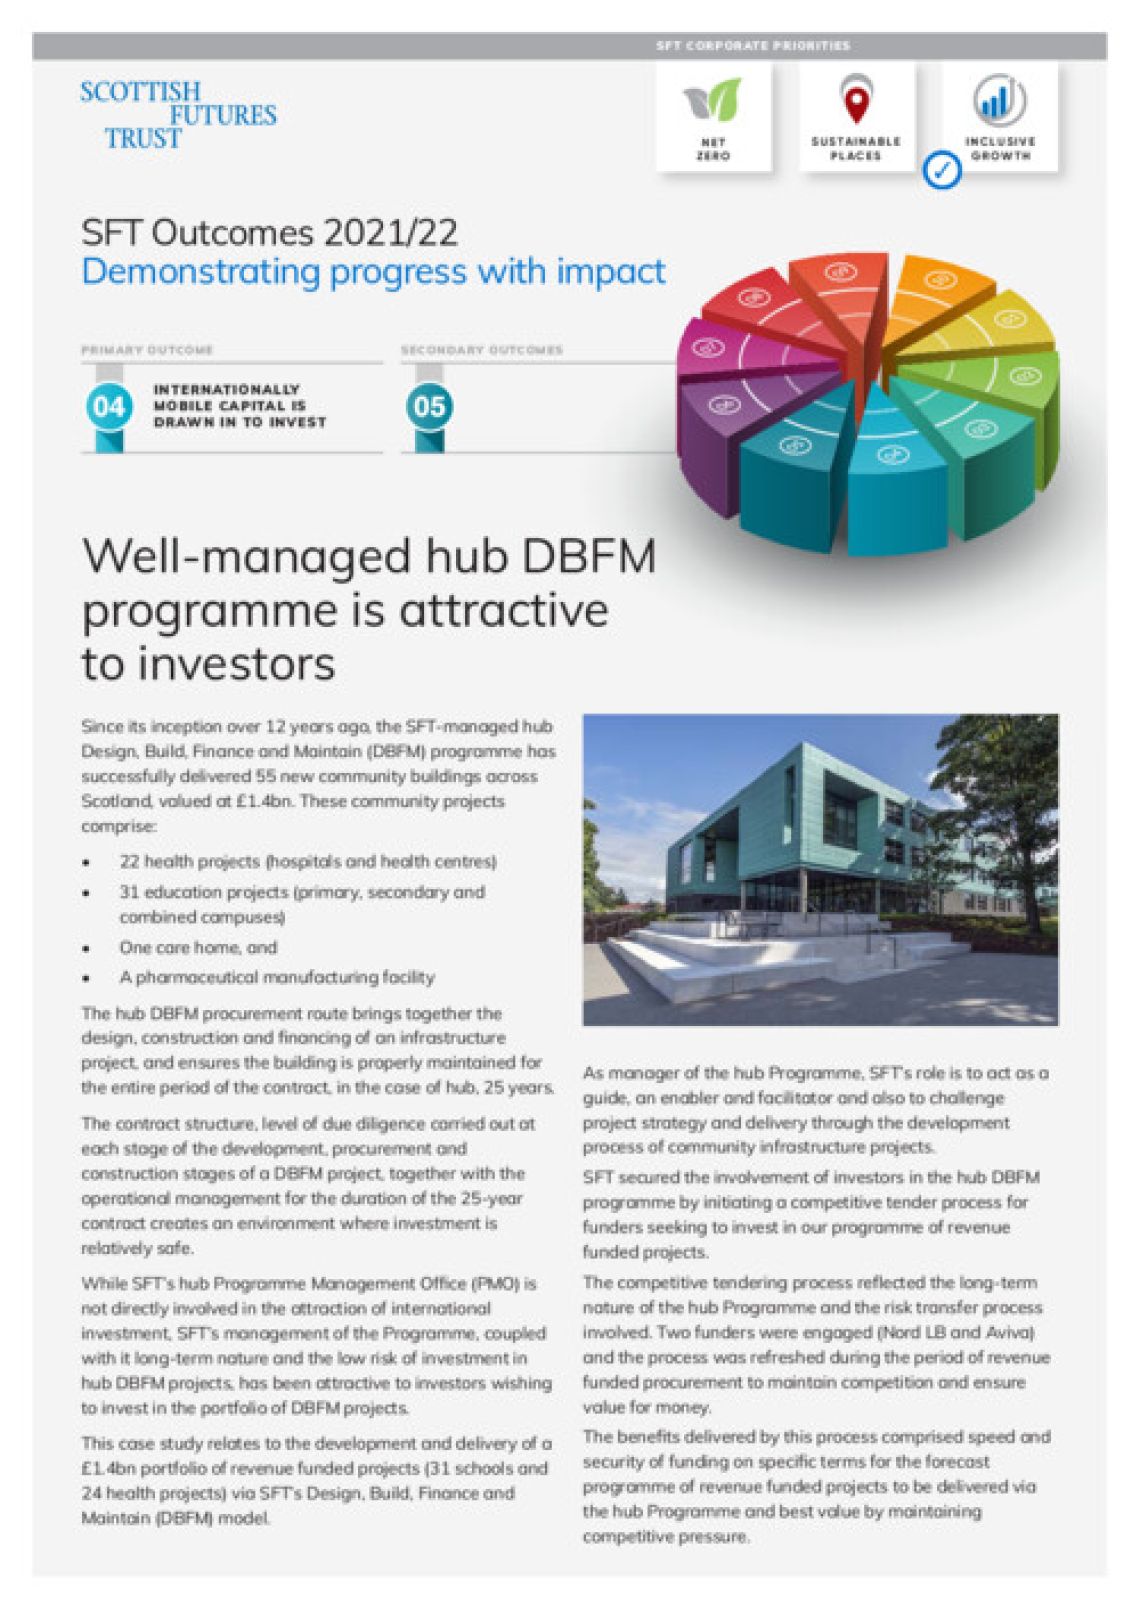 Well-managed hub DBFM programme is attractive to investors cover